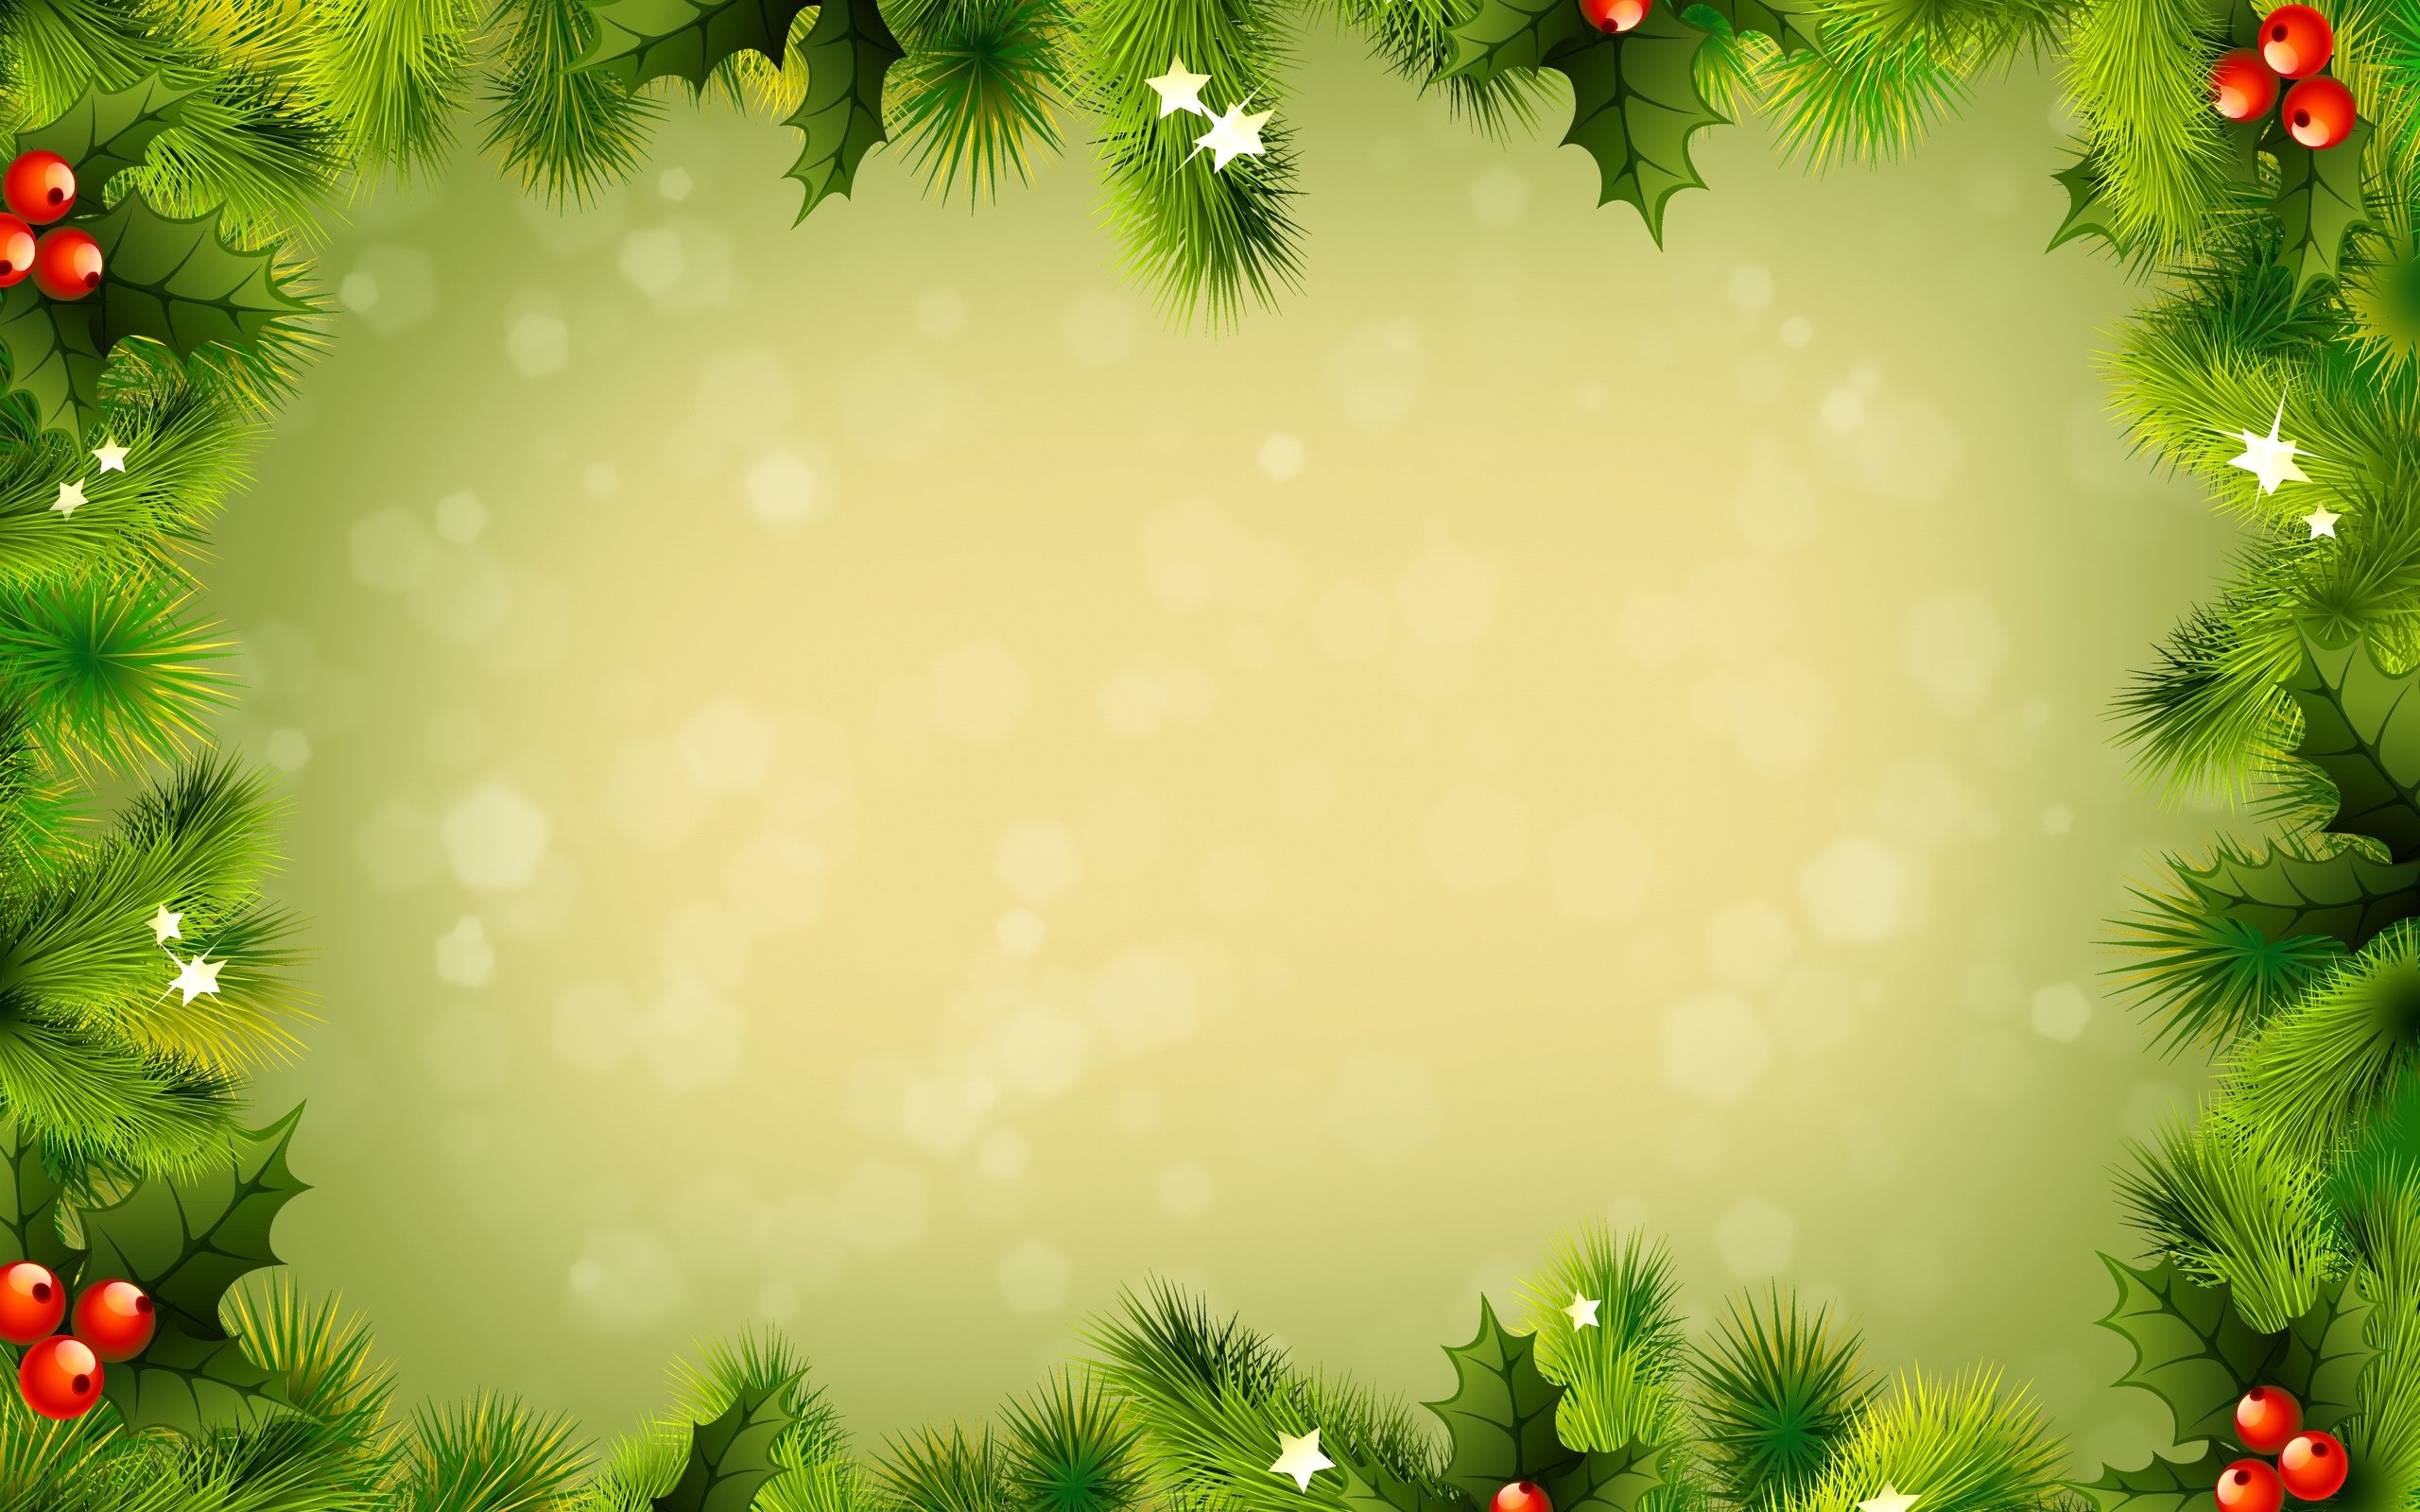 53 Christian Christmas Backgrounds Download Free Cool